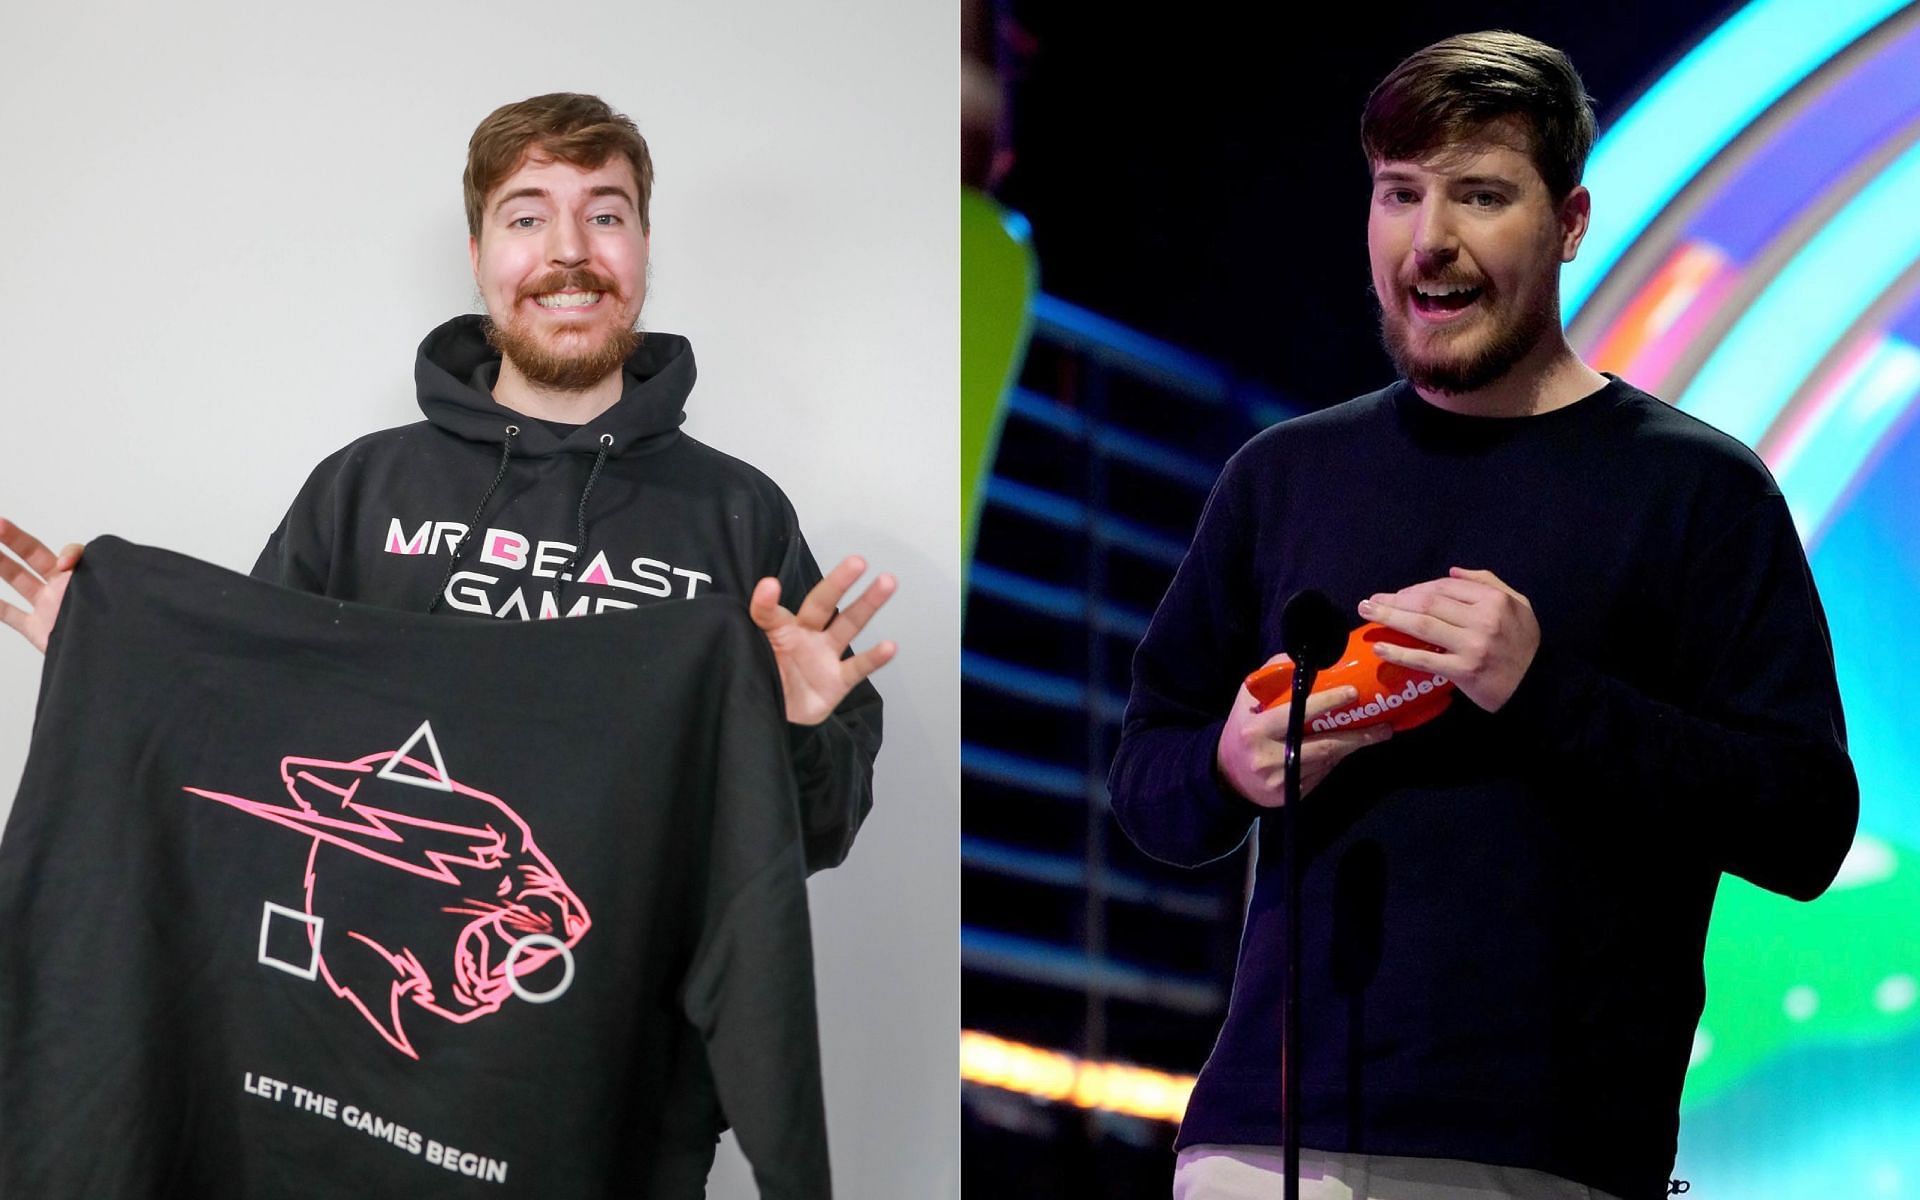 MrBeast shares how fans have addressed him over the years (Images via MrBeast/Twitter)